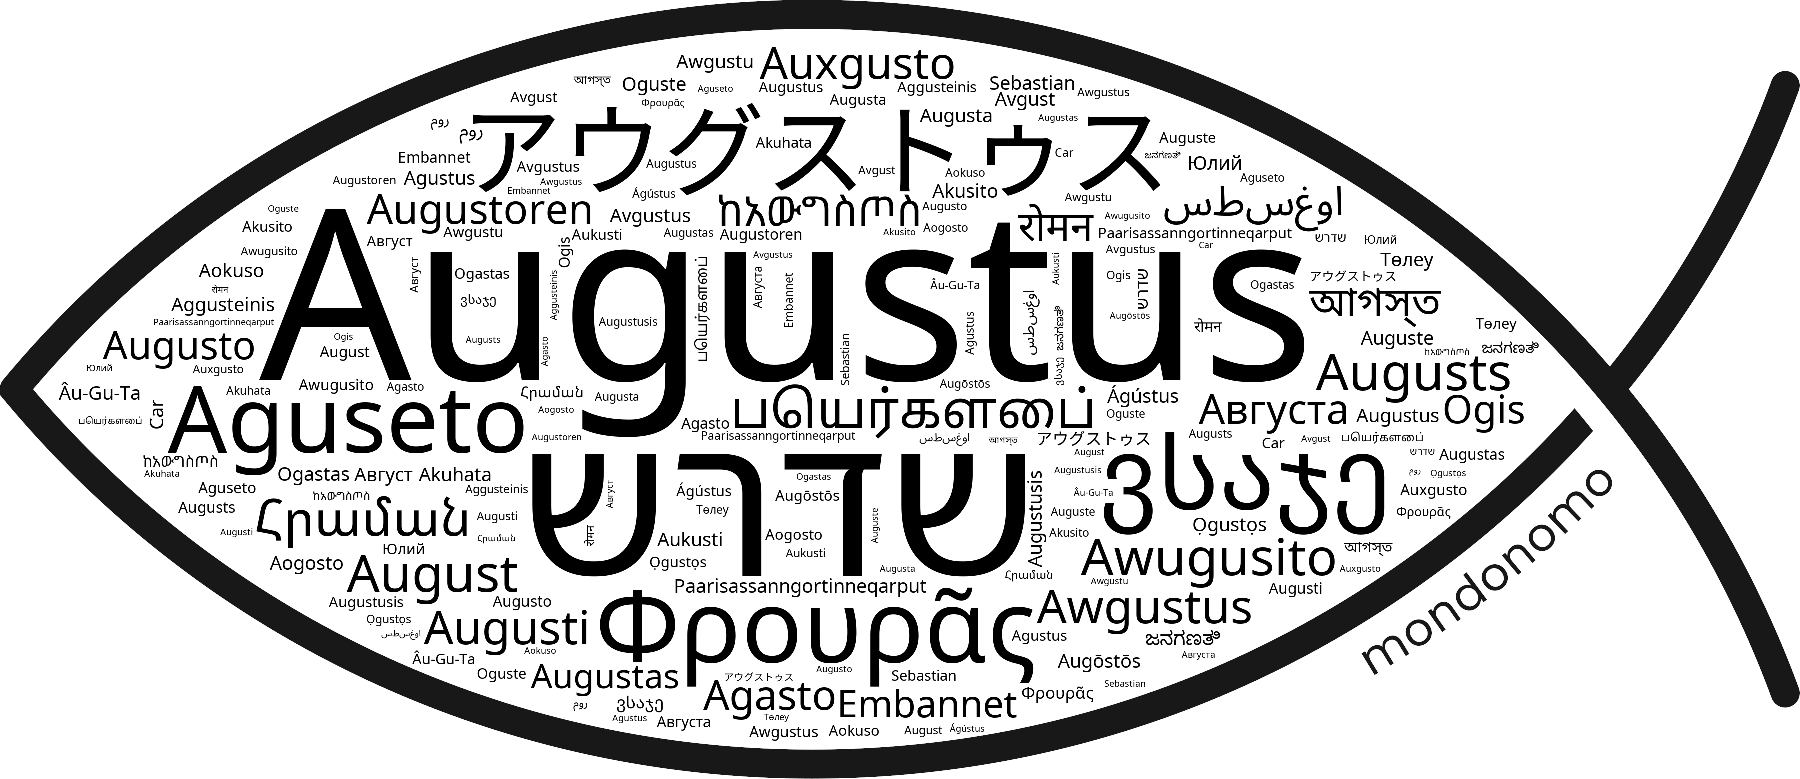 Name Augustus in the world's Bibles